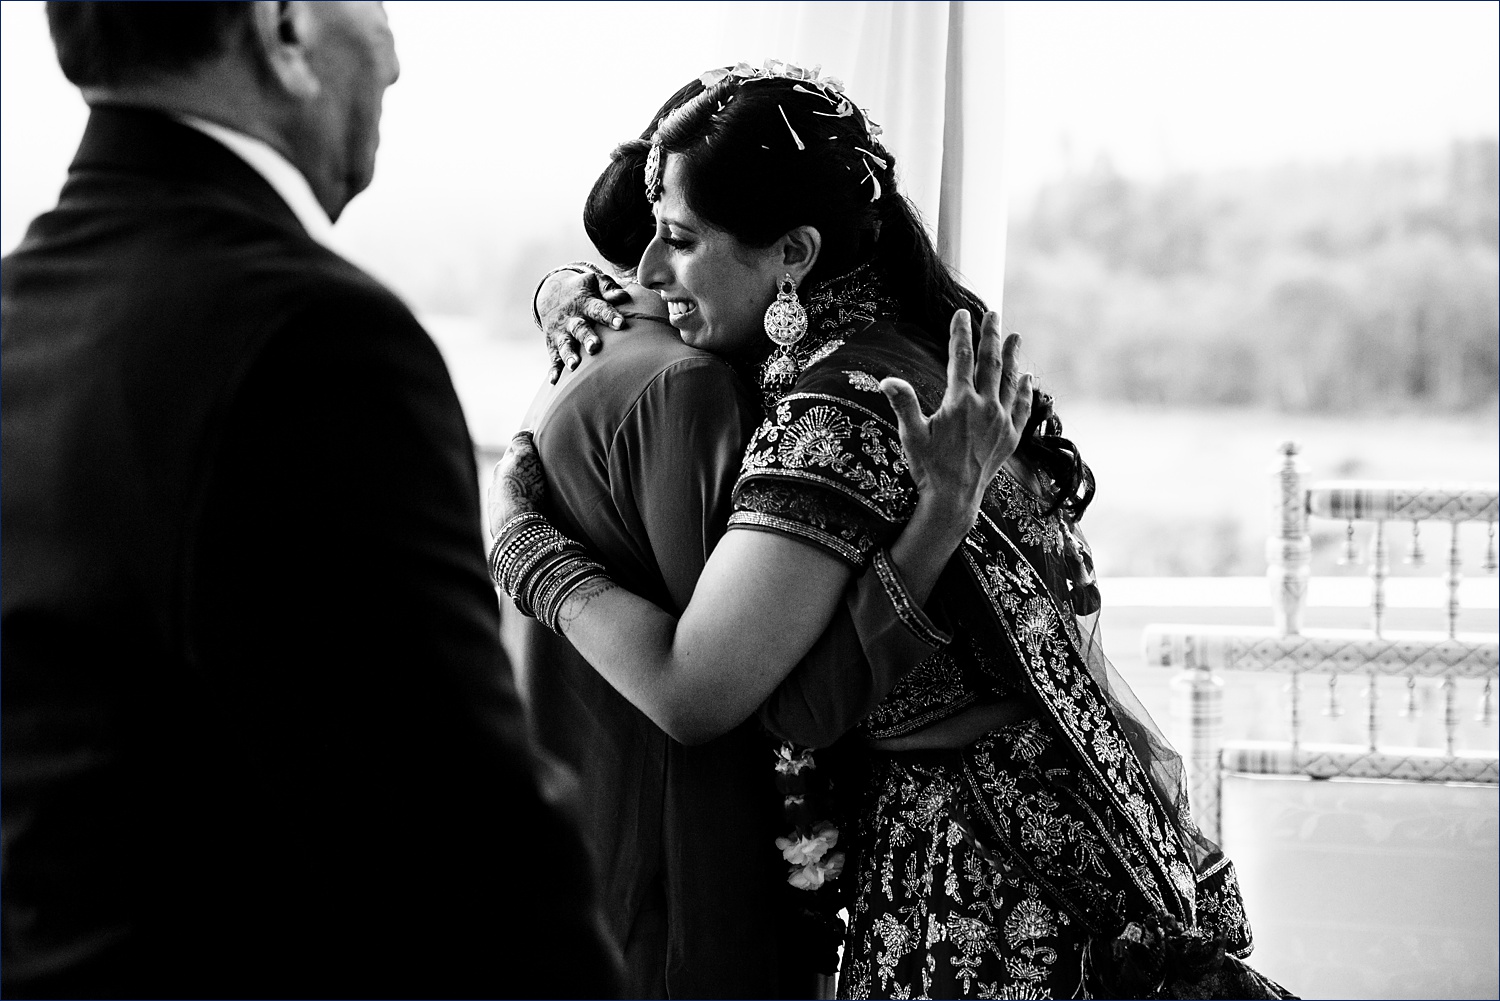 A tearful bride and her mom hug each other on the bride's wedding day